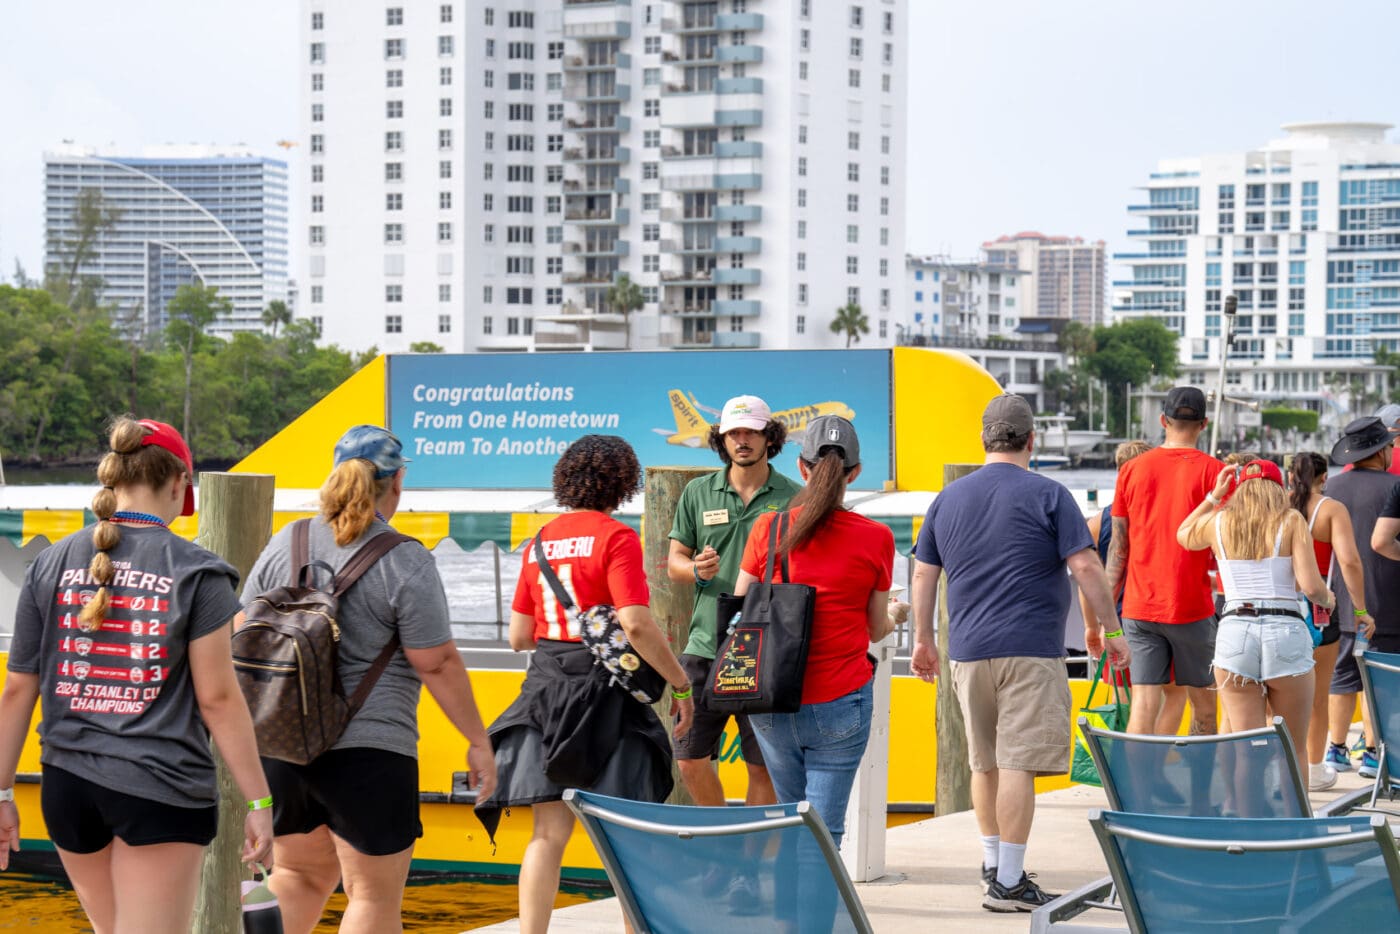 Spirit Airlines congratulating the Florida Panthers through digital billboards at the Fort lauderdale water taxi